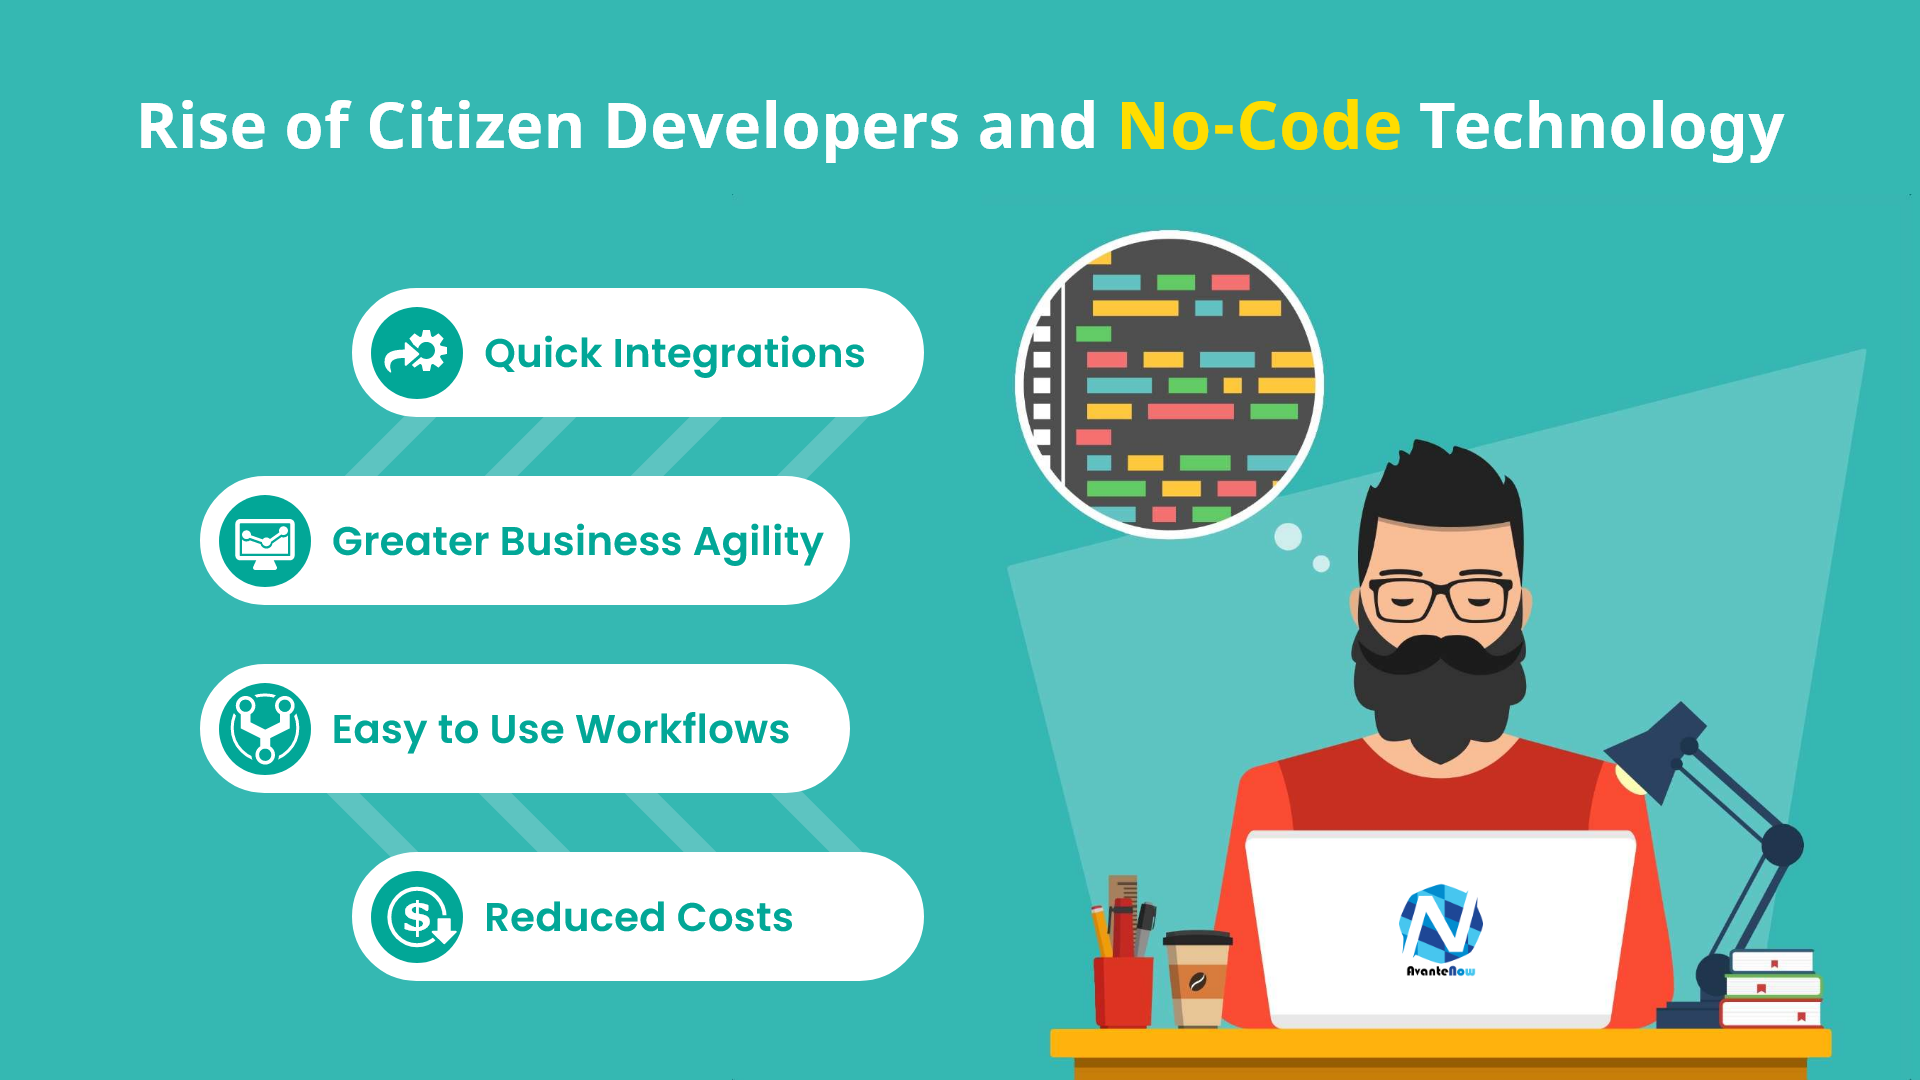 RISE OF CITIZEN DEVELOPERS AND NO-CODE TECHNOLOGY